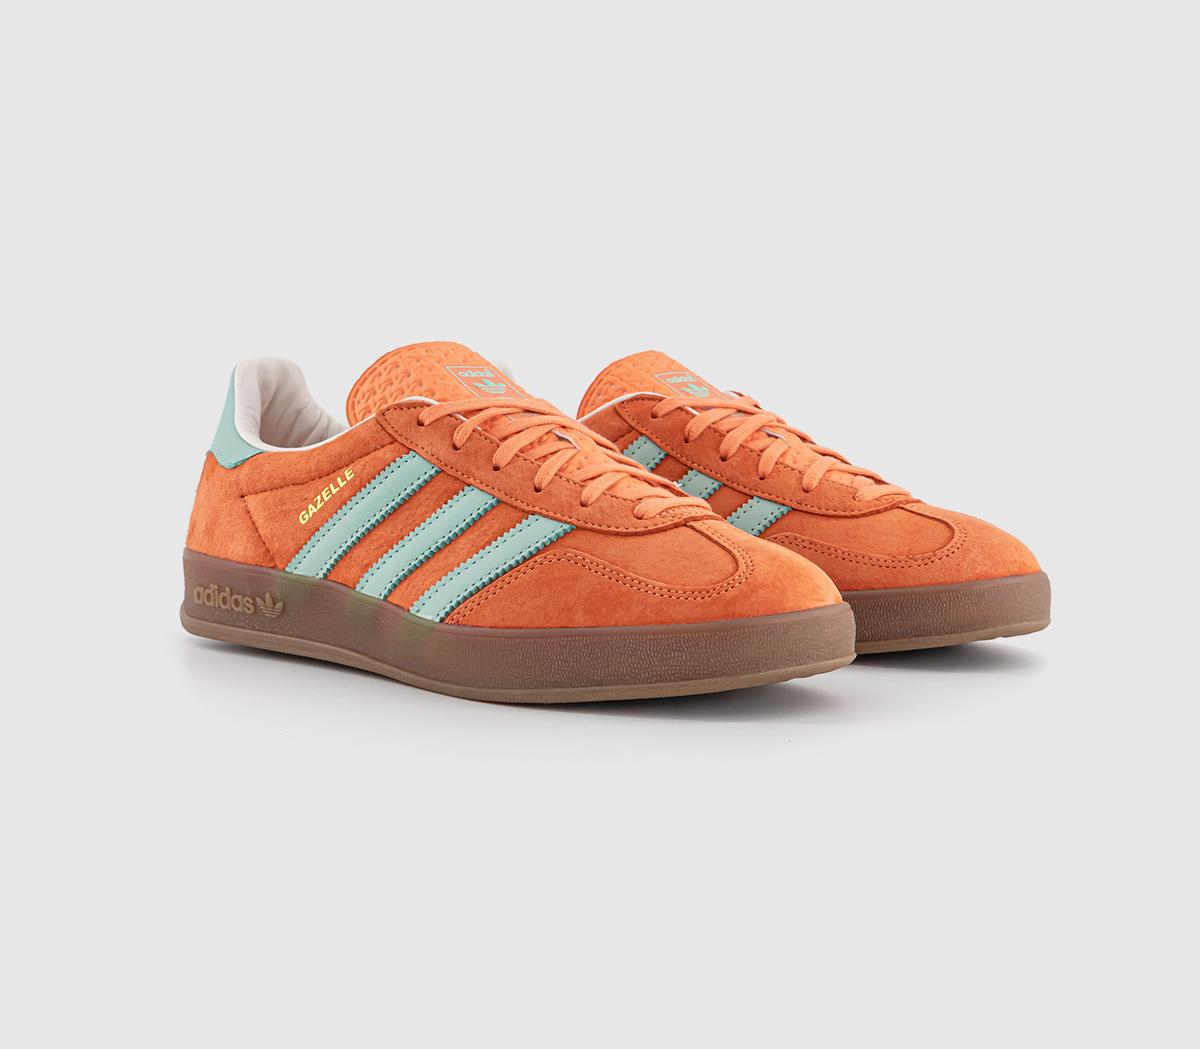 Adidas Gazelle Indoor Trainers Easy Orange Clear Mint Gum Red, 7.5